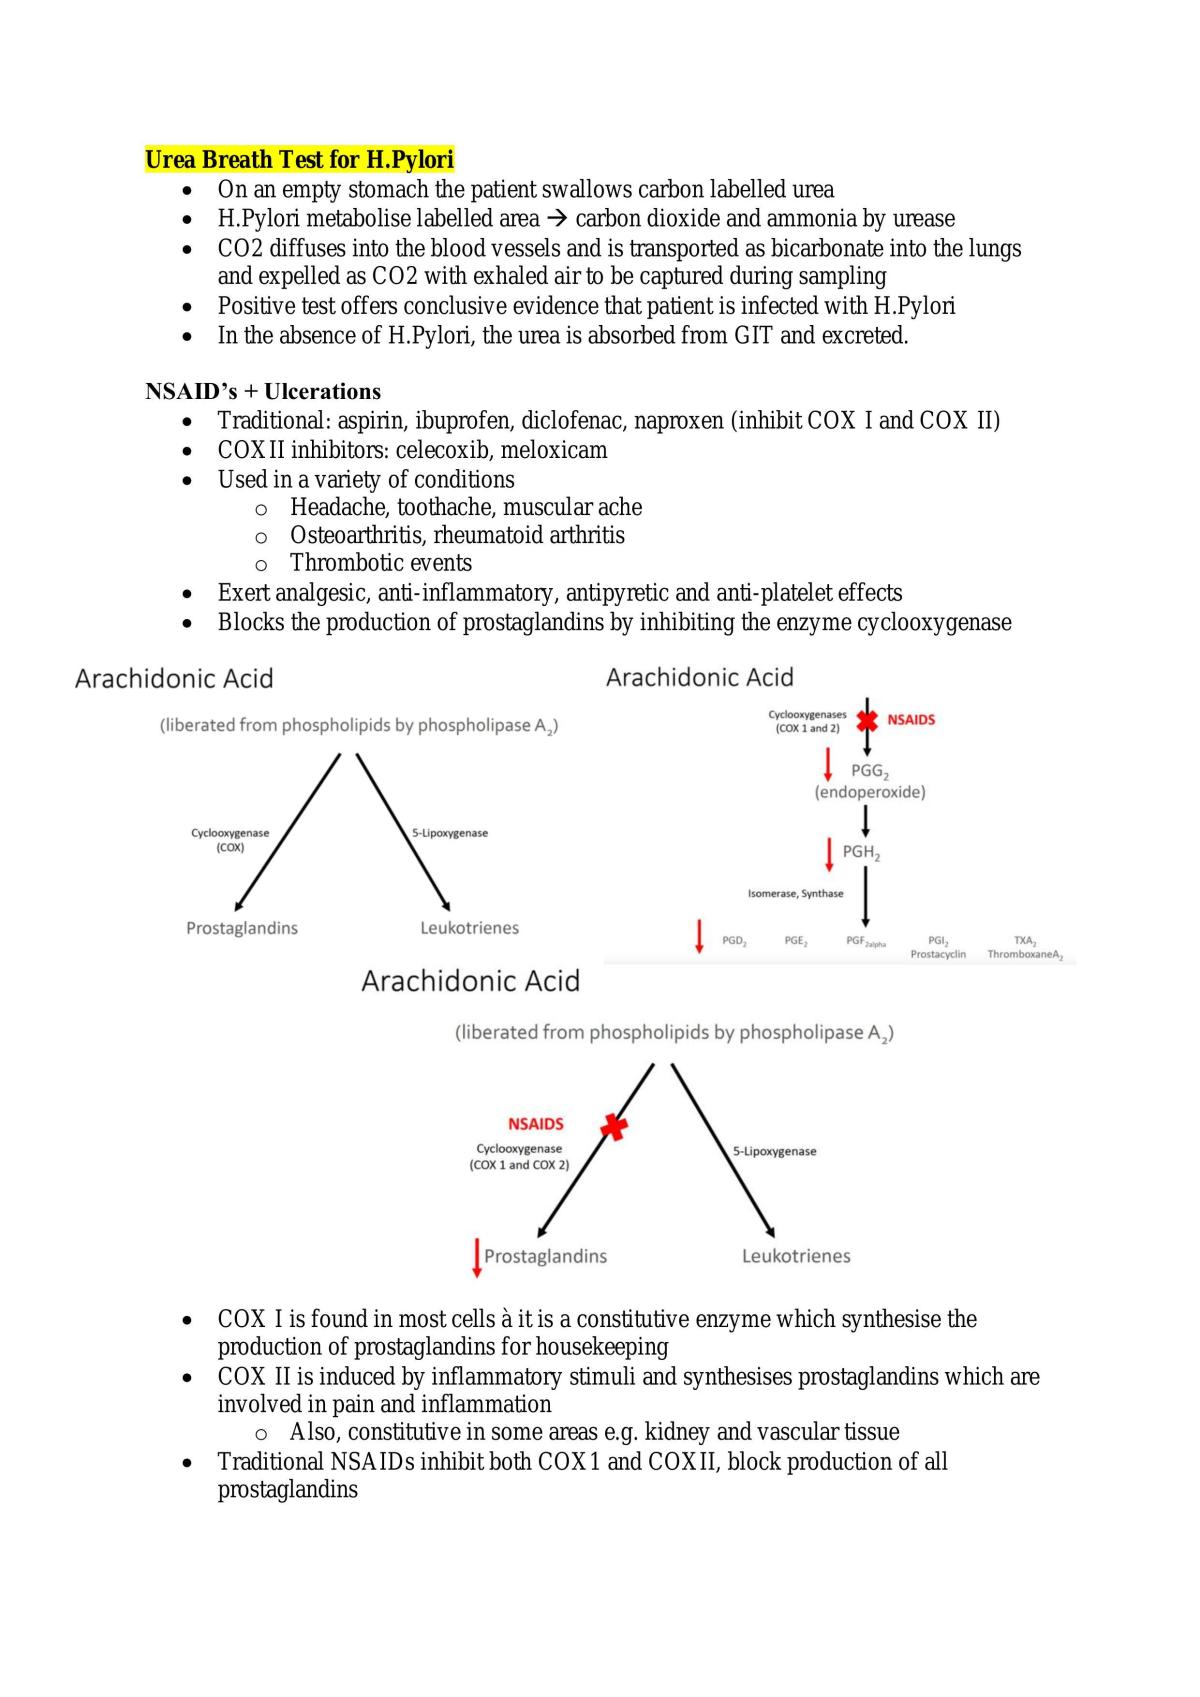 PCOL2605: Pharmacology for Pharmacy - COMPLETE NOTES  - Page 55